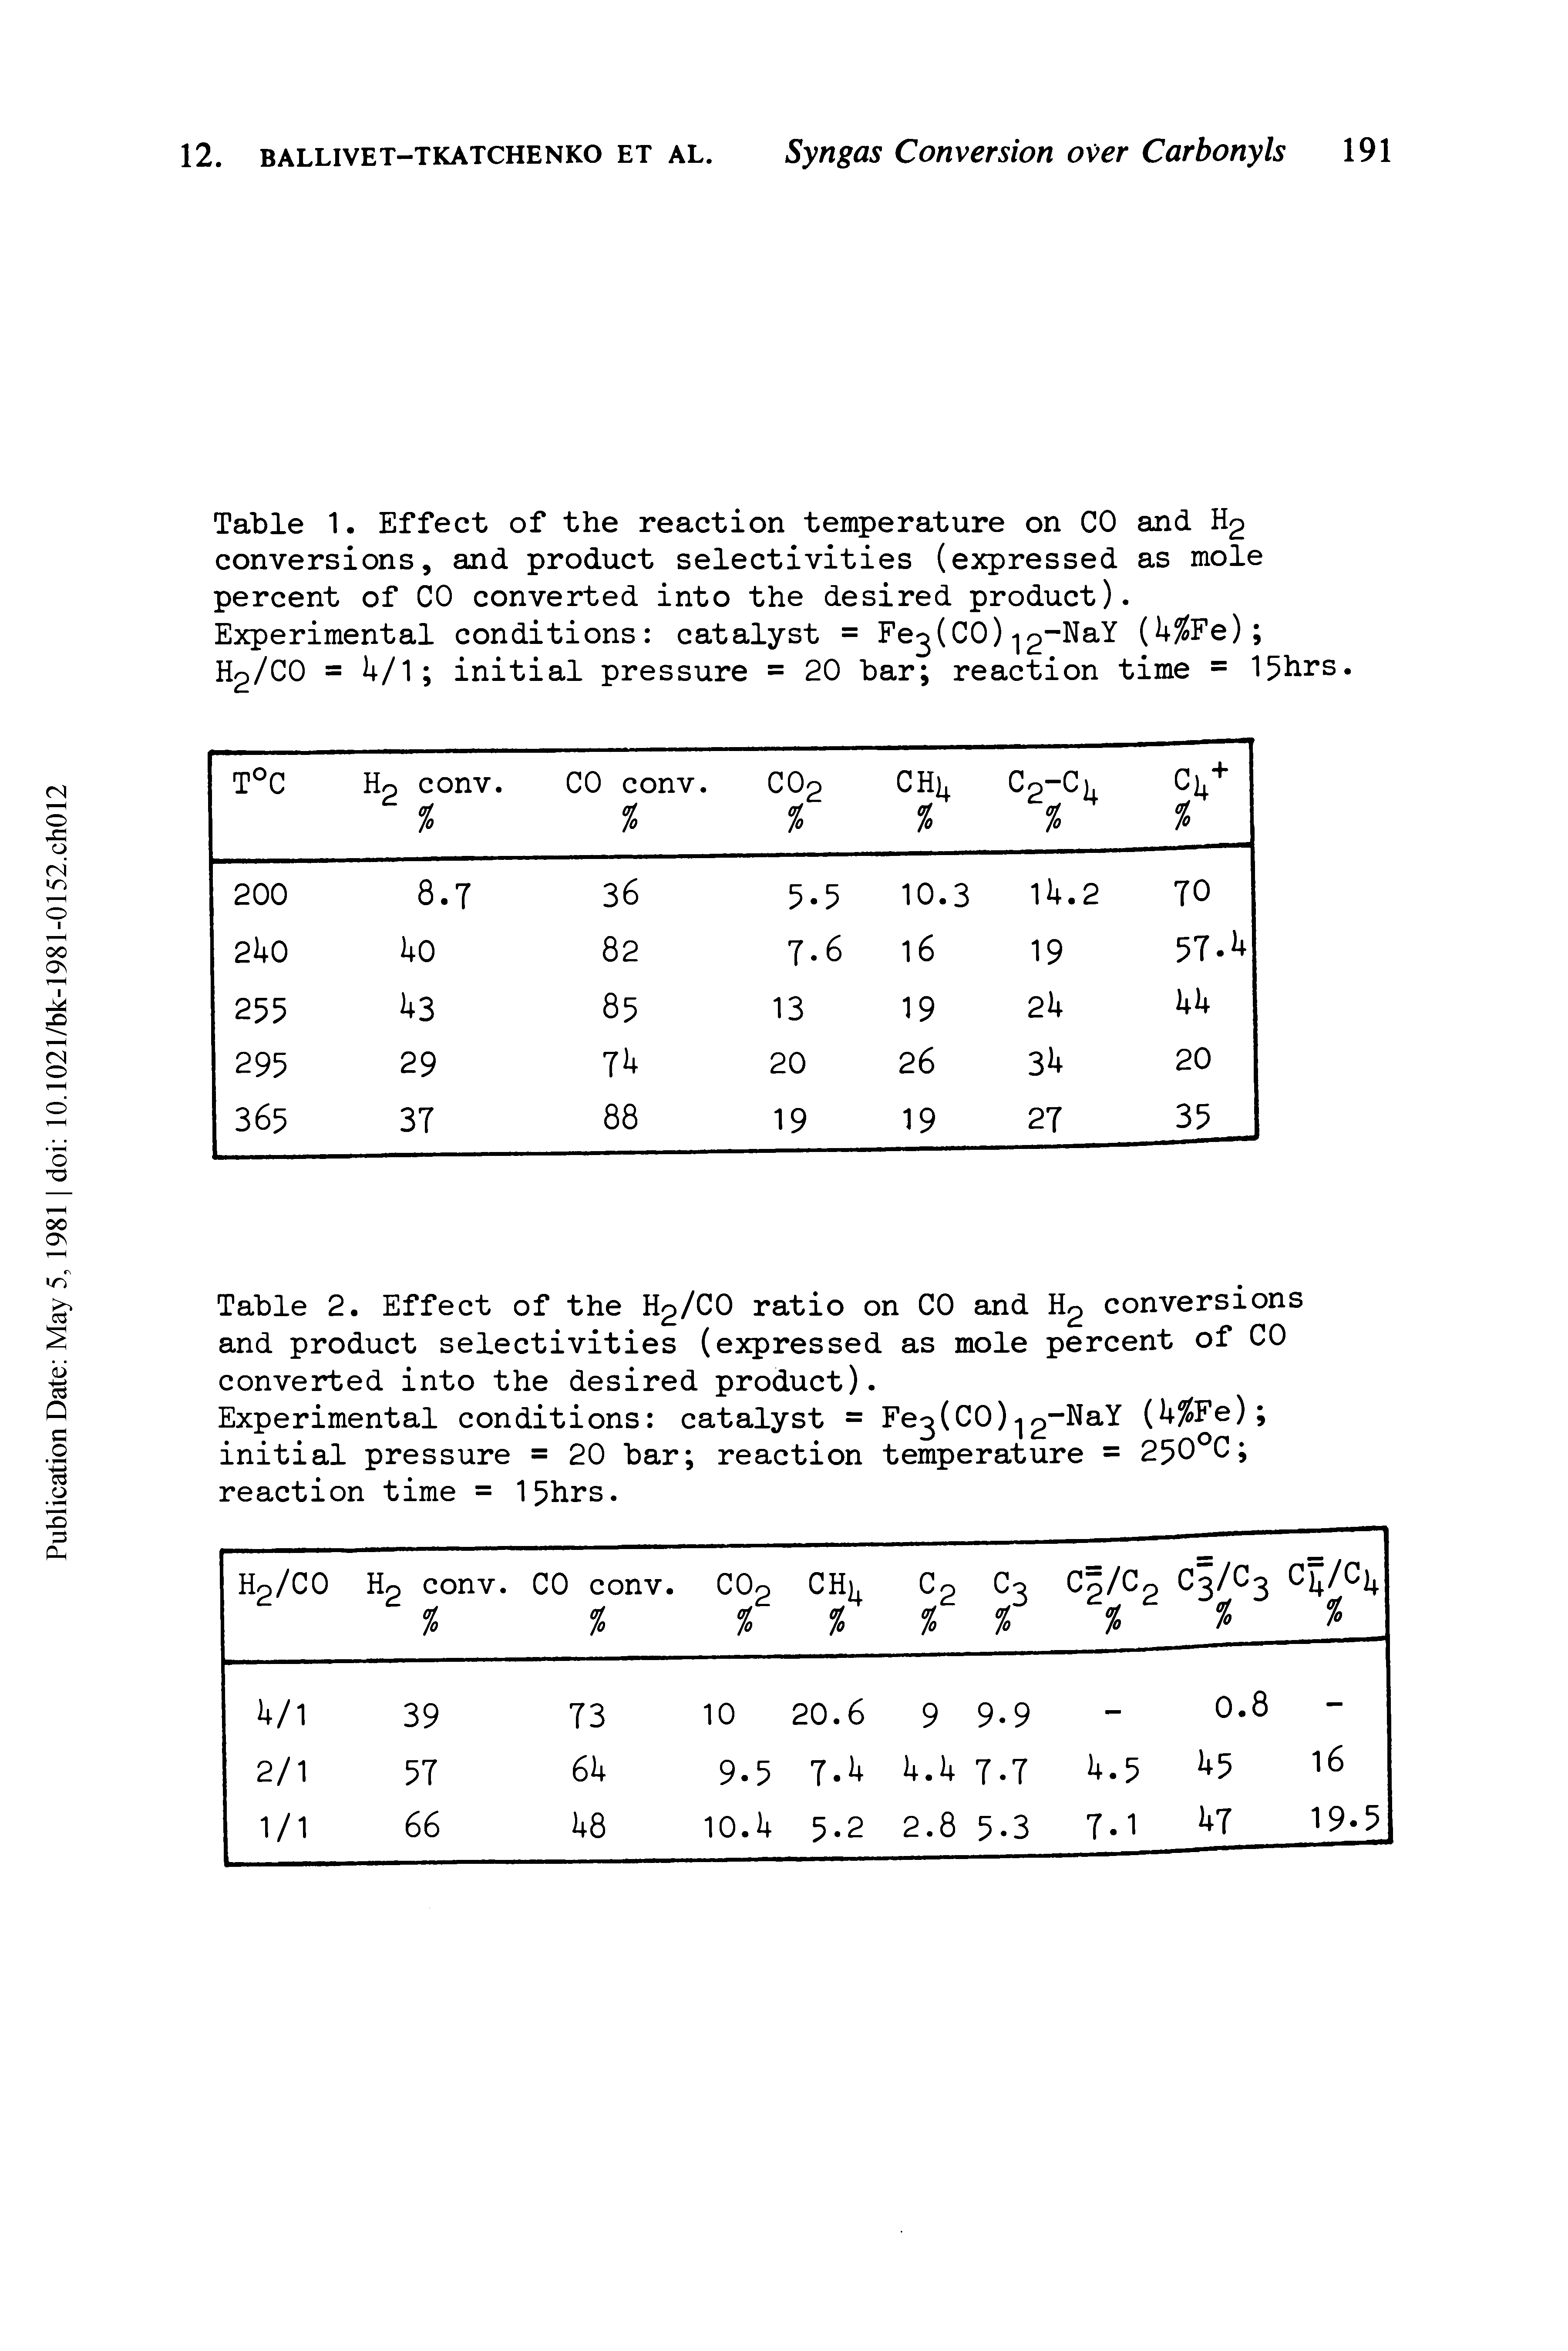 Table 1. Effect of the reaction temperature on CO and H2 conversions, and product selectivities (expressed as mole percent of CO converted into the desired product).